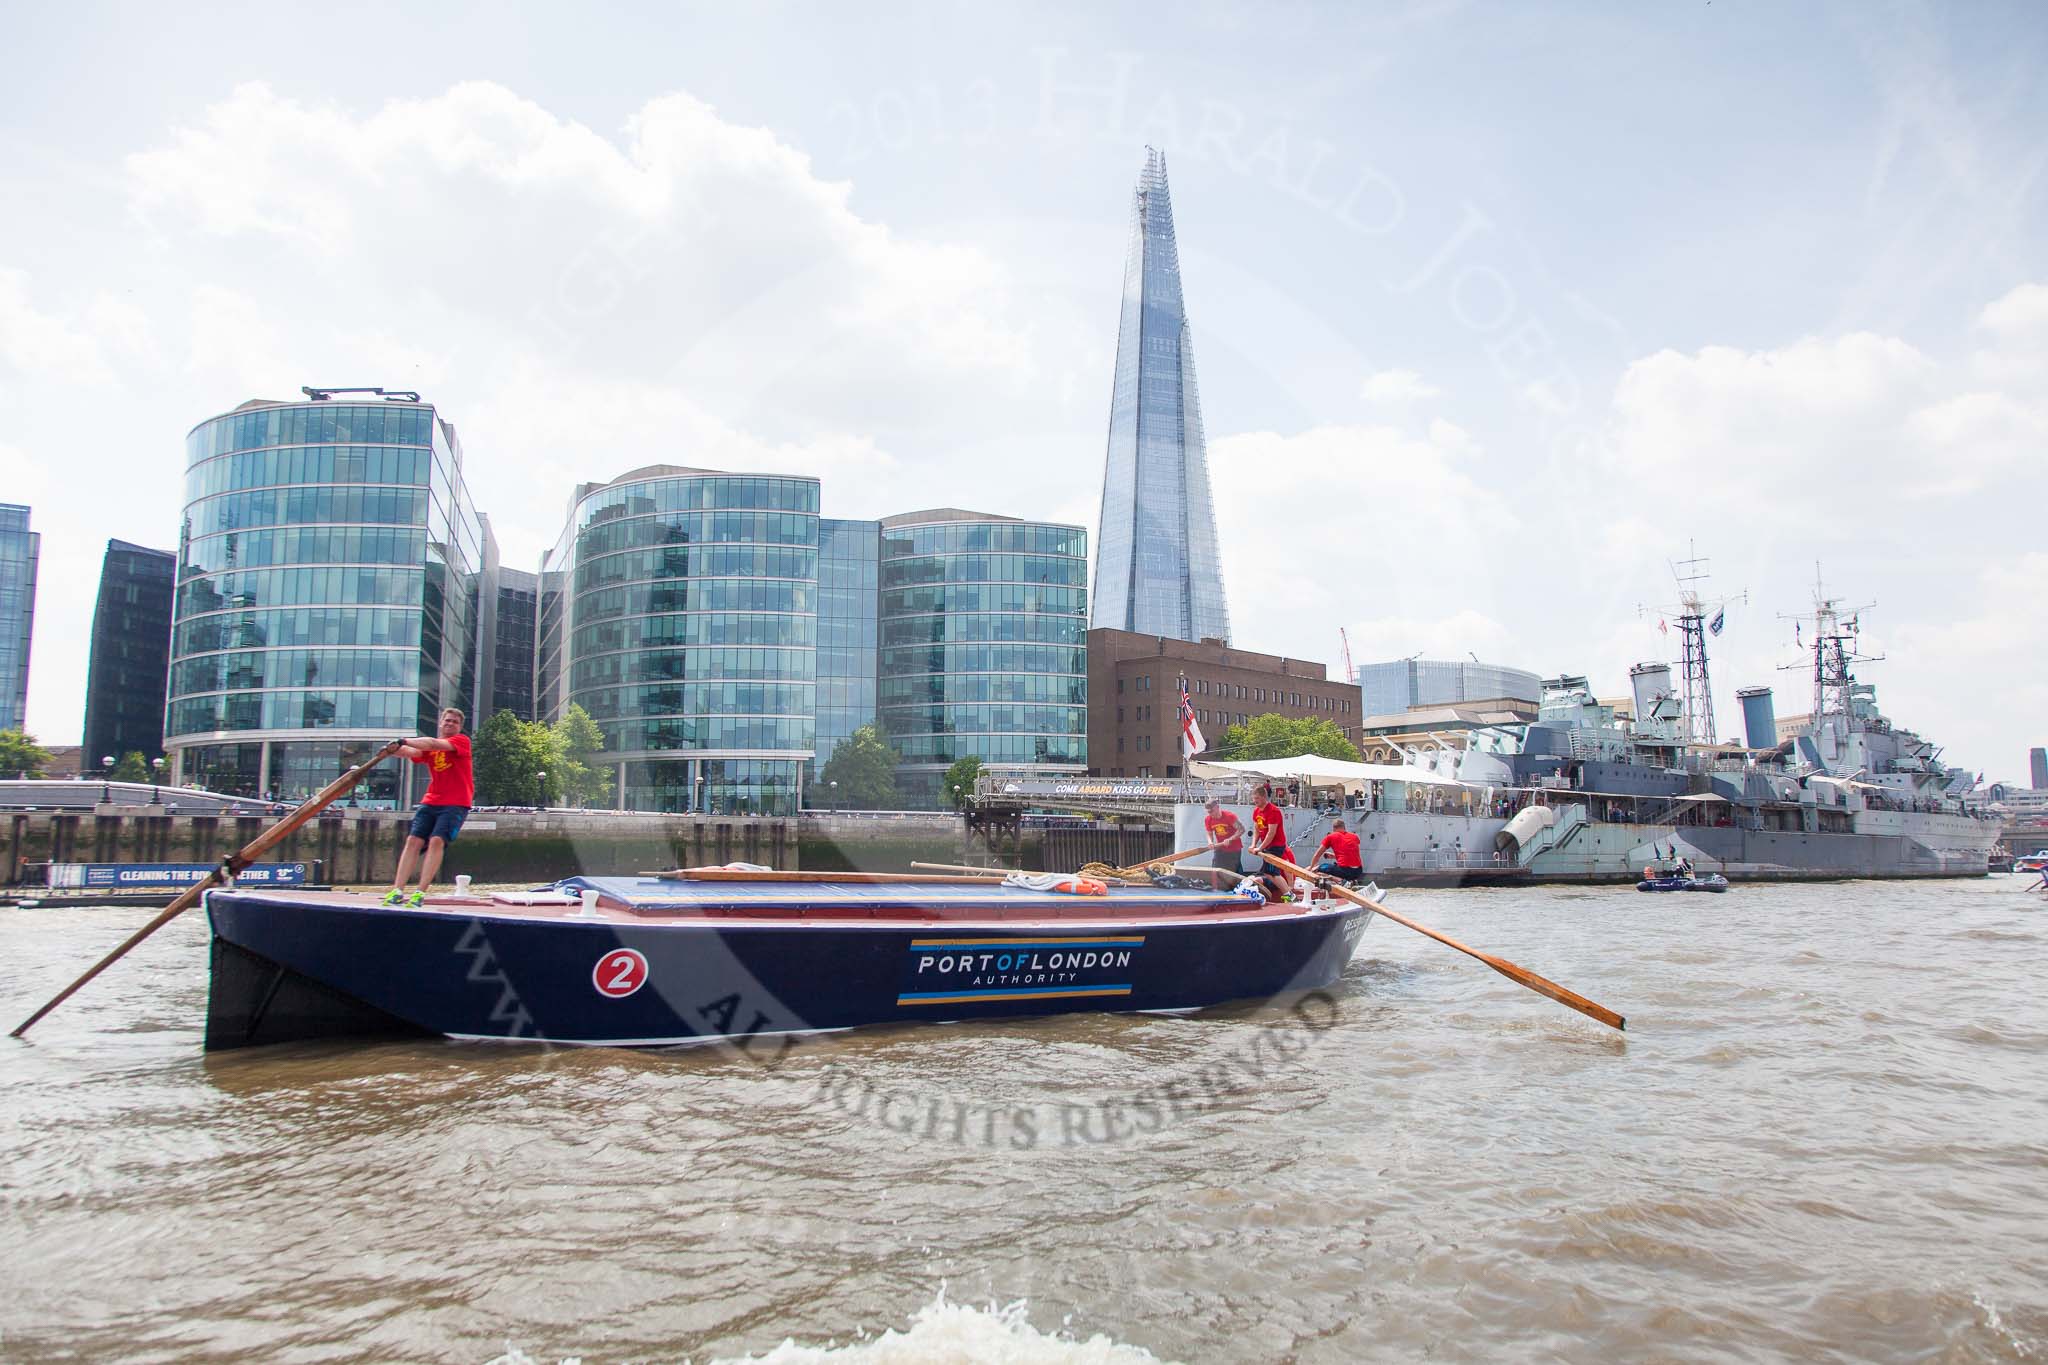 TOW River Thames Barge Driving Race 2013: Barge "Blackwall", by the Port of London Authority, approaching HMS Belfast, with the Shard building behind..
River Thames between Greenwich and Westminster,
London,

United Kingdom,
on 13 July 2013 at 13:46, image #392